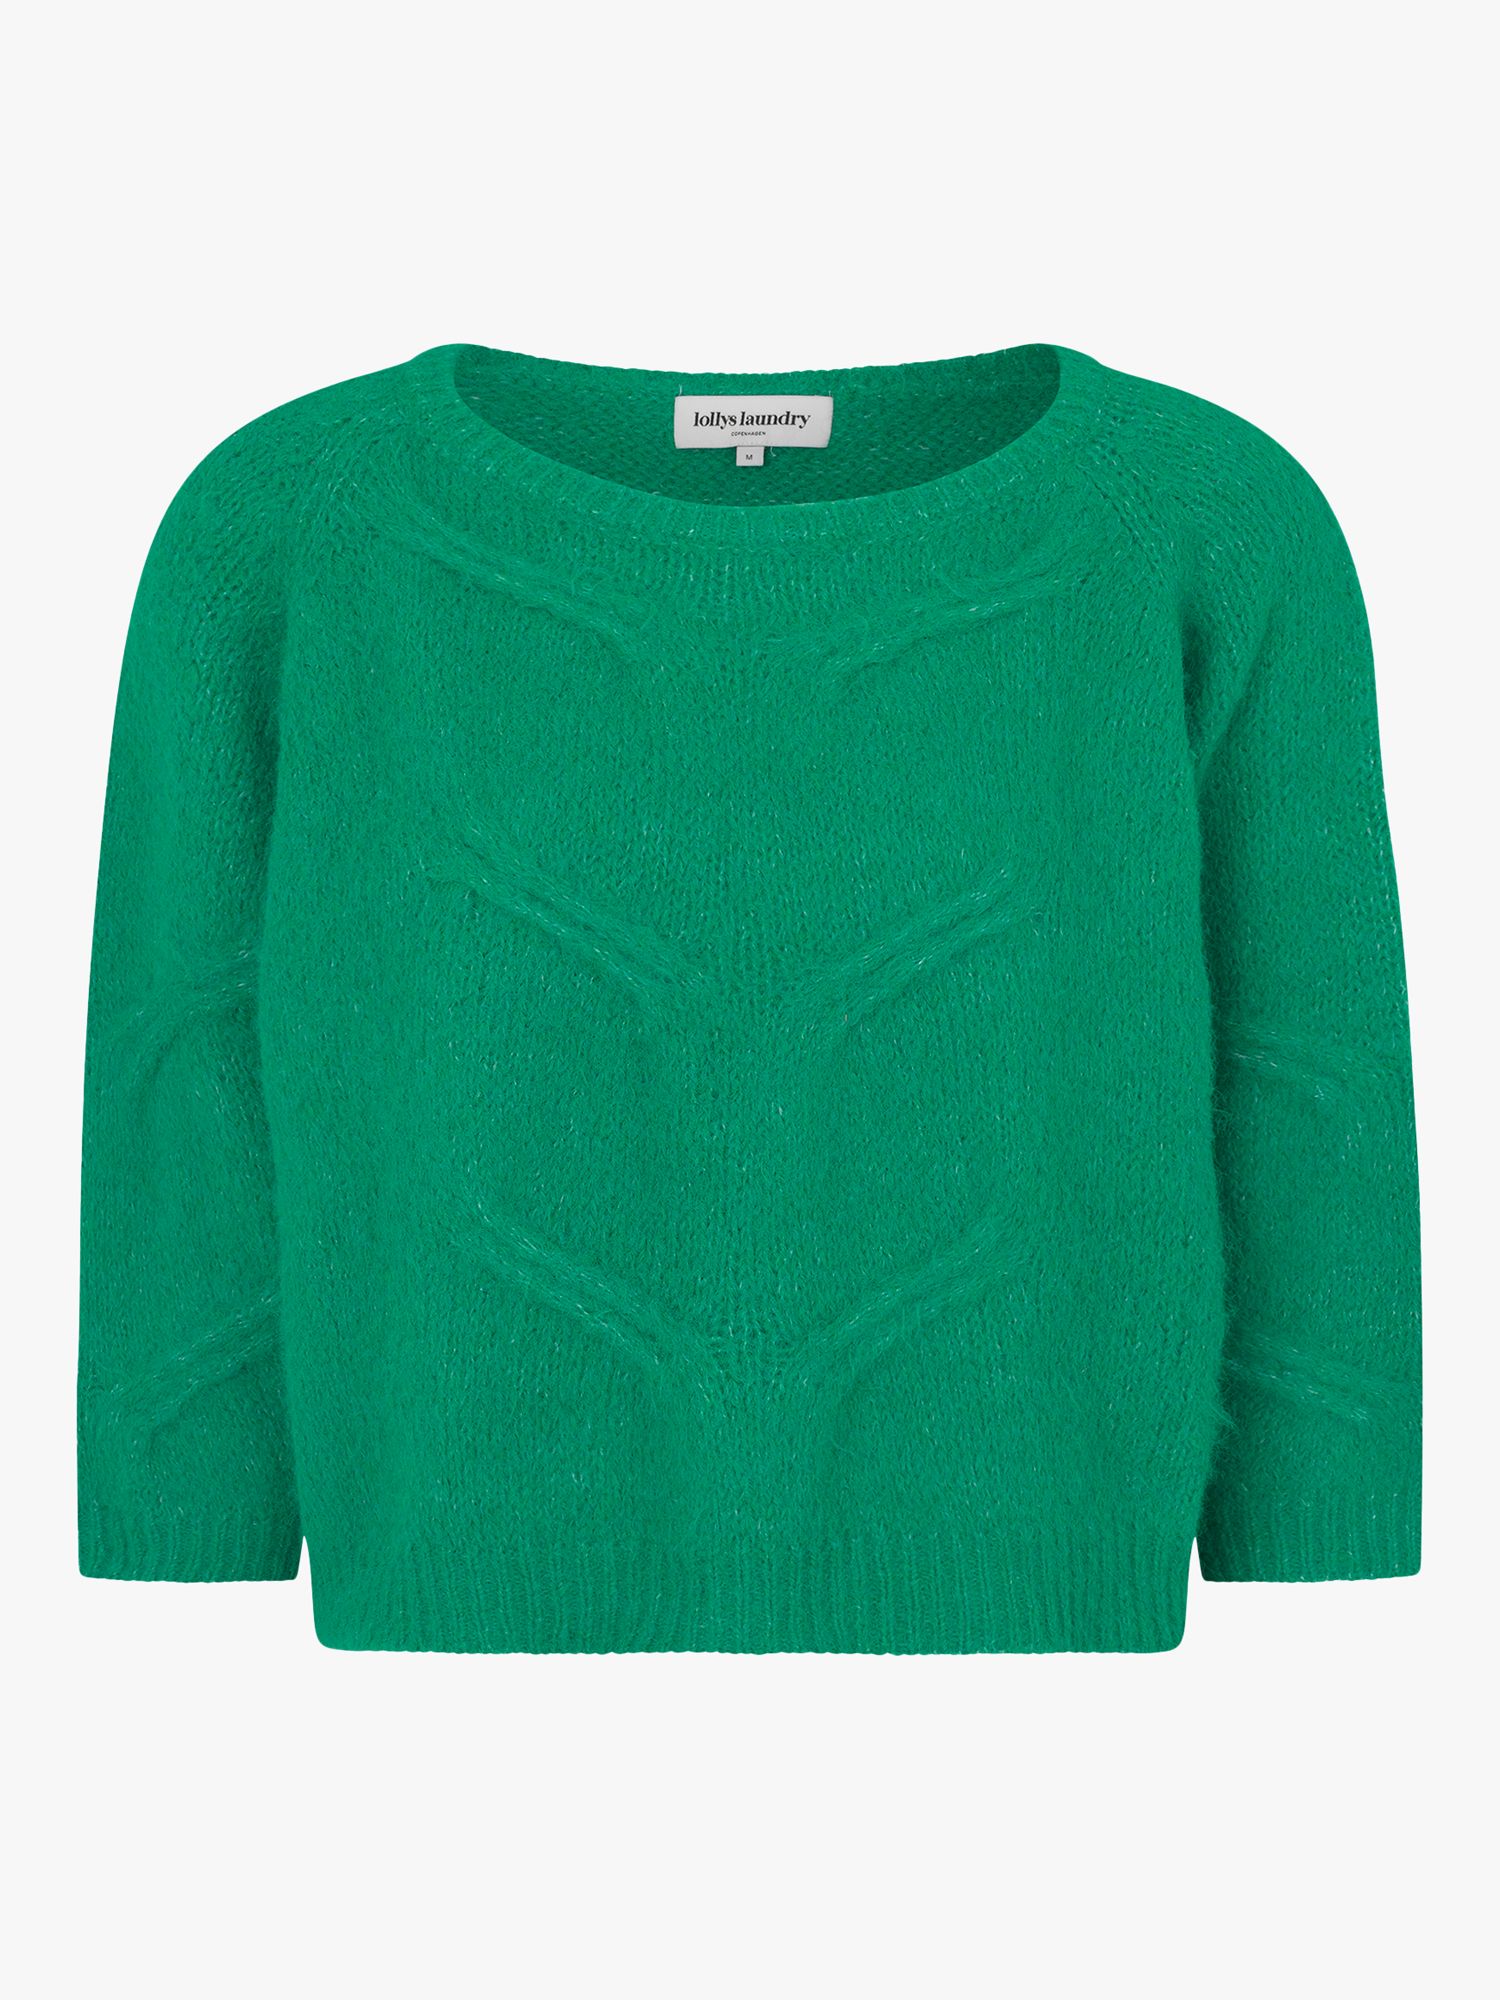 Lollys Laundry Tortuga Relaxed Fit Jumper, Emerald Green, XS